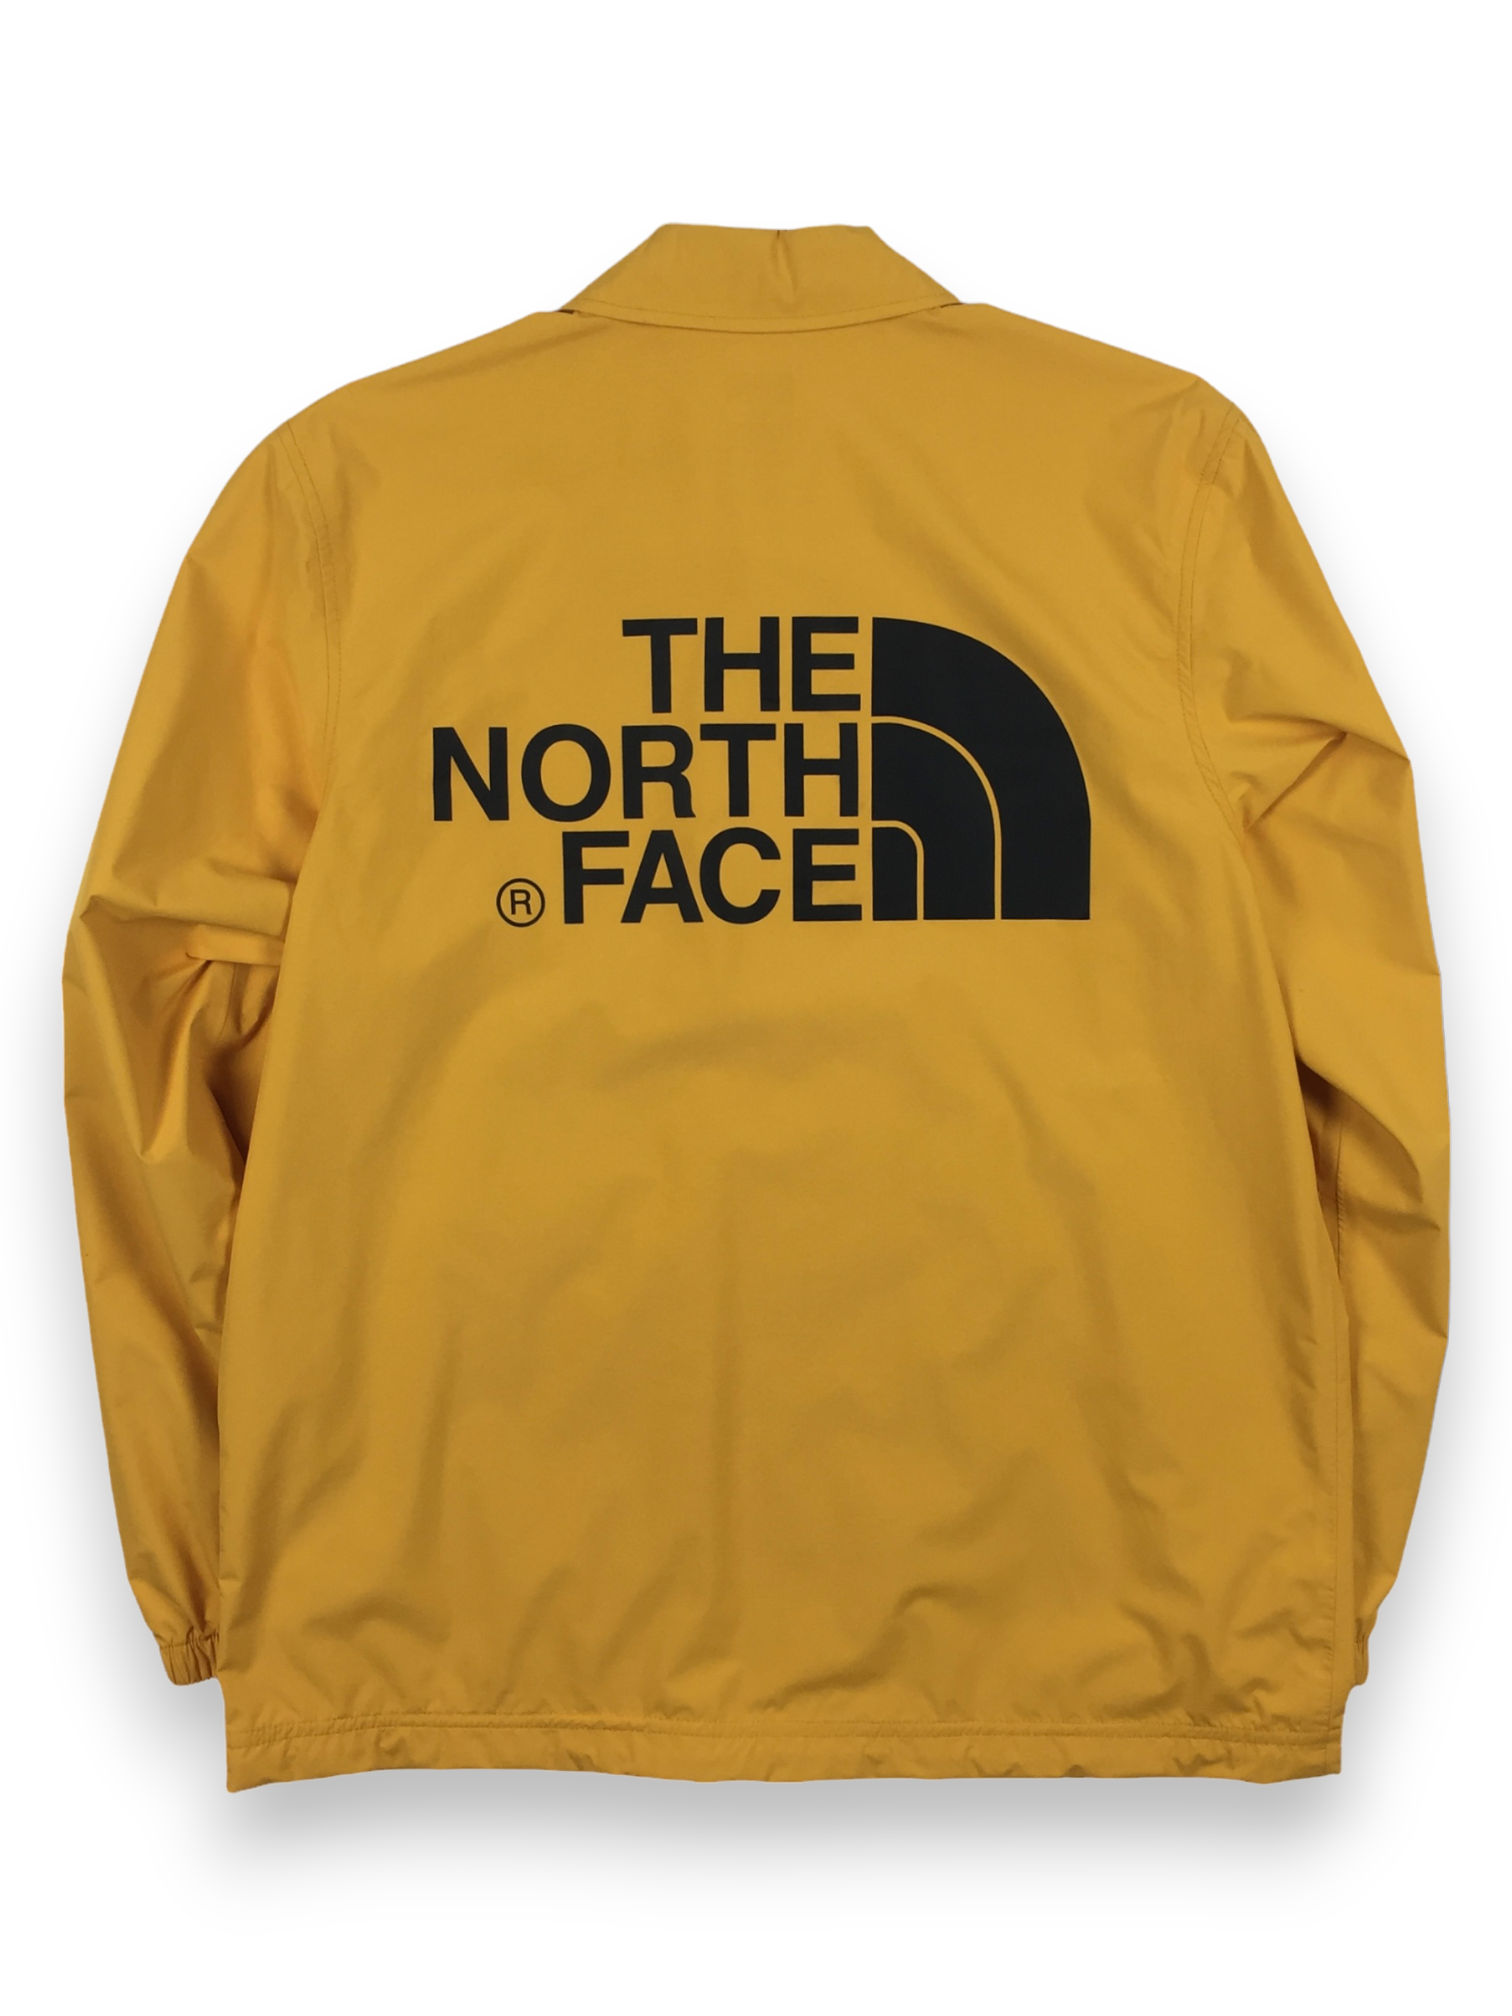 2015 Supreme x The North Face Packable Yellow Coach